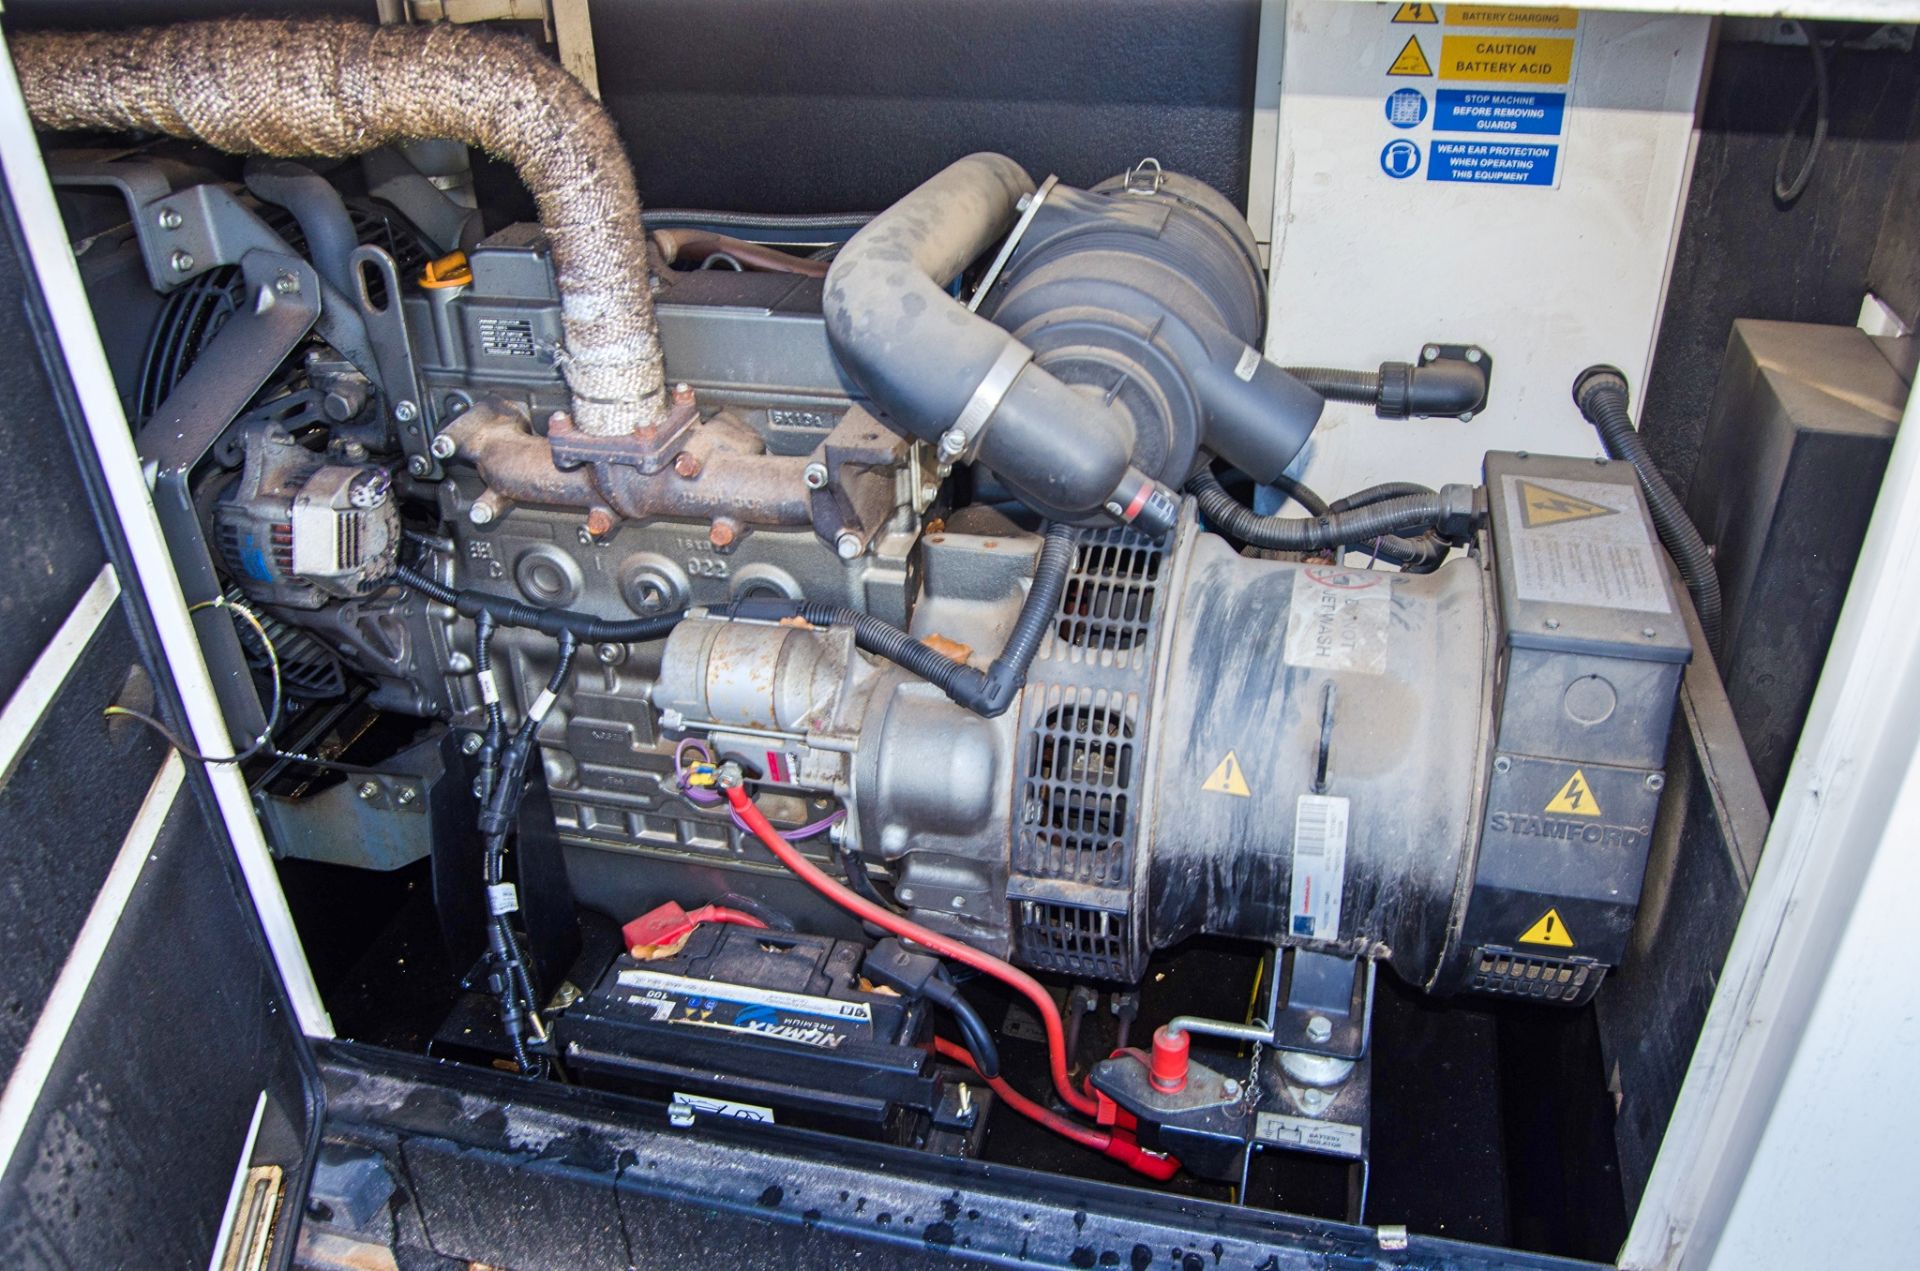 JCB 19 kva diesel driven generator Year: 2017 S/N: 2481889 Recorded Hours: 5290 A775446 - Image 5 of 5